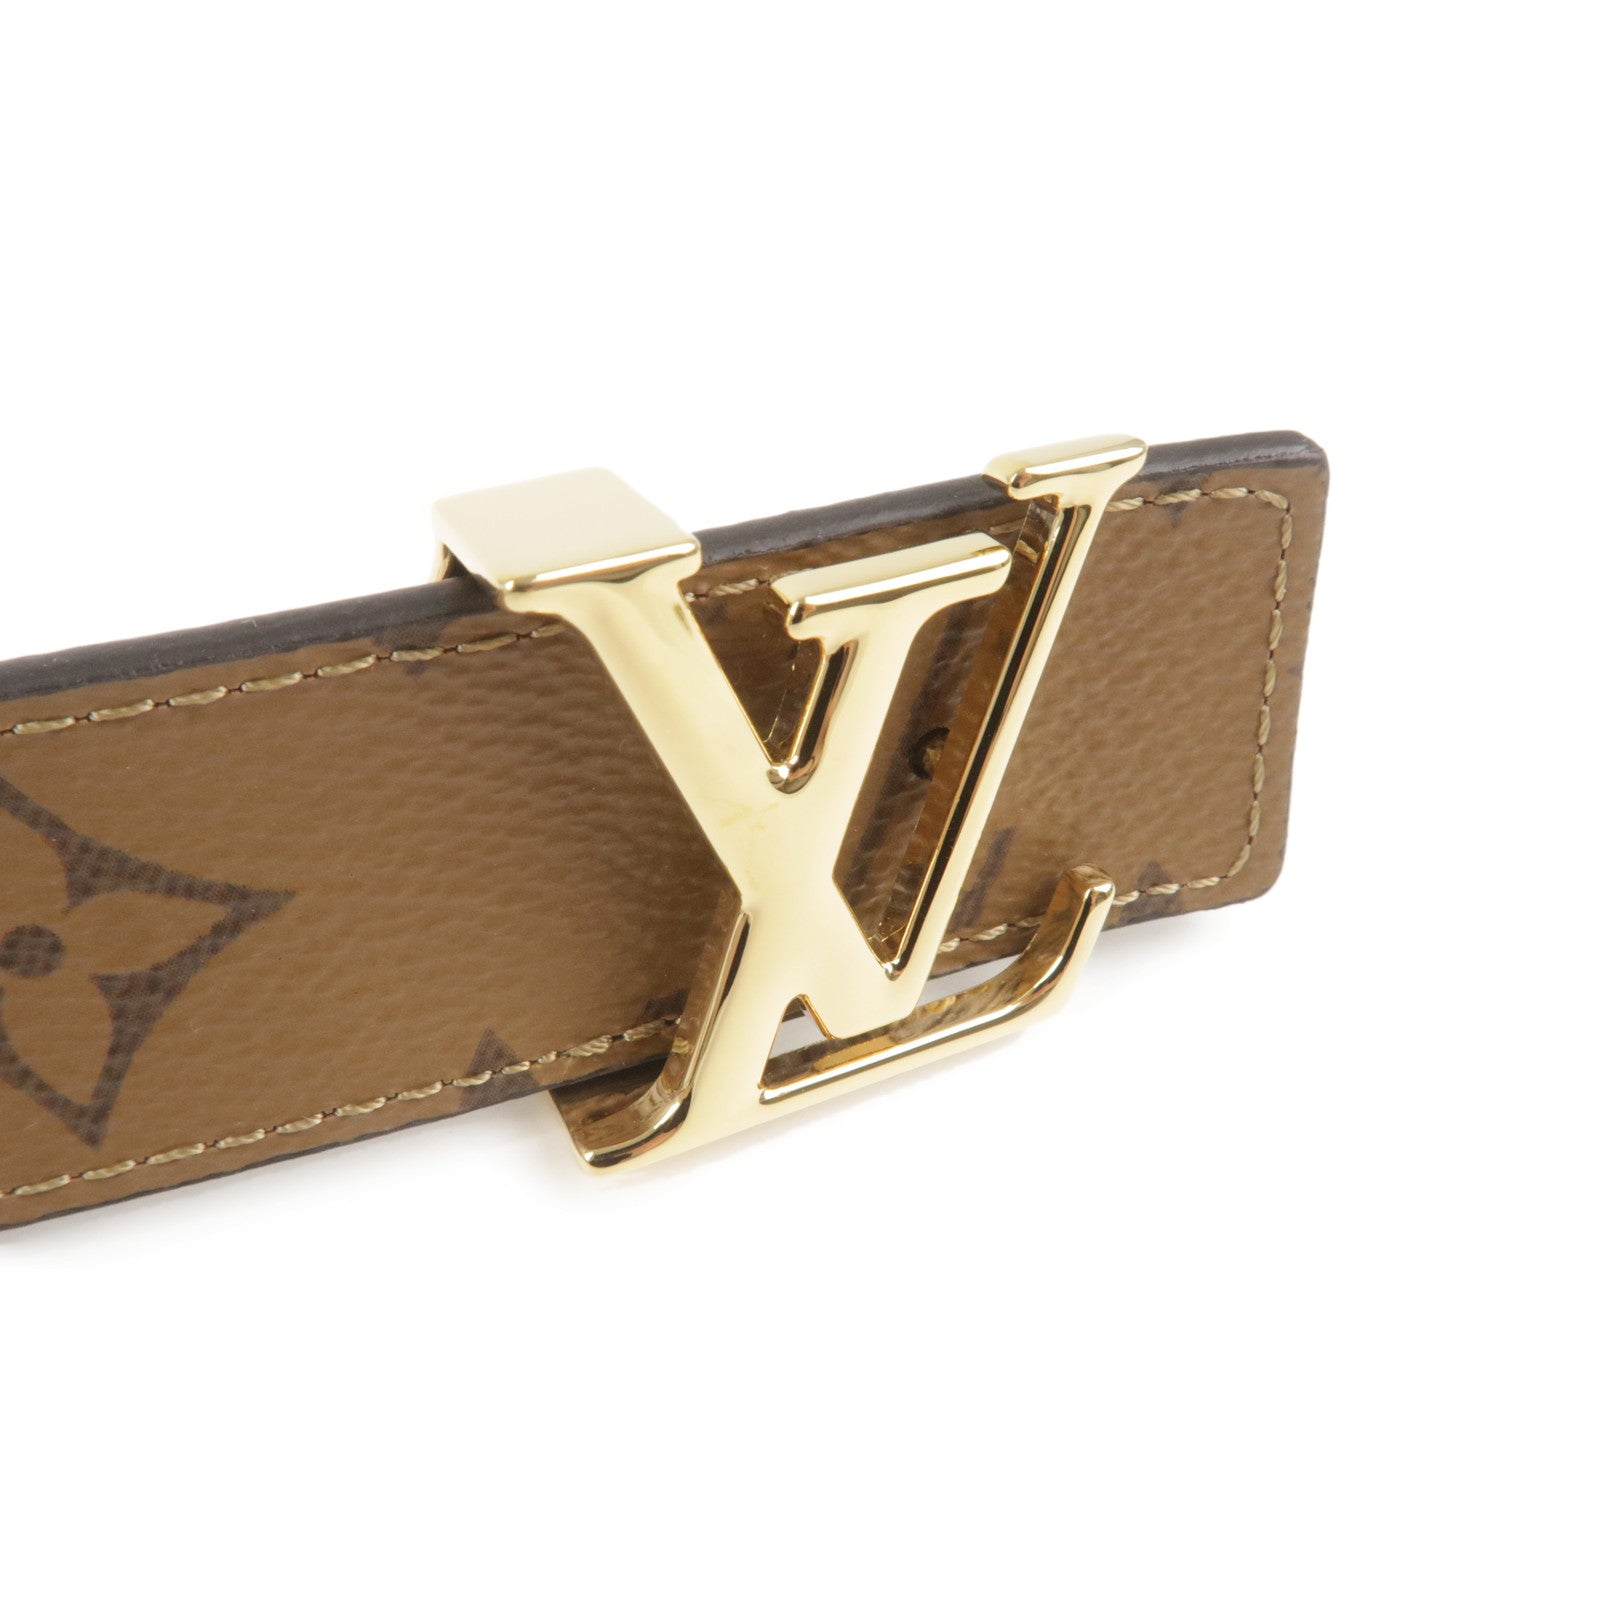 Initiales leather belt Louis Vuitton Beige size 85 cm in Leather - 30156203